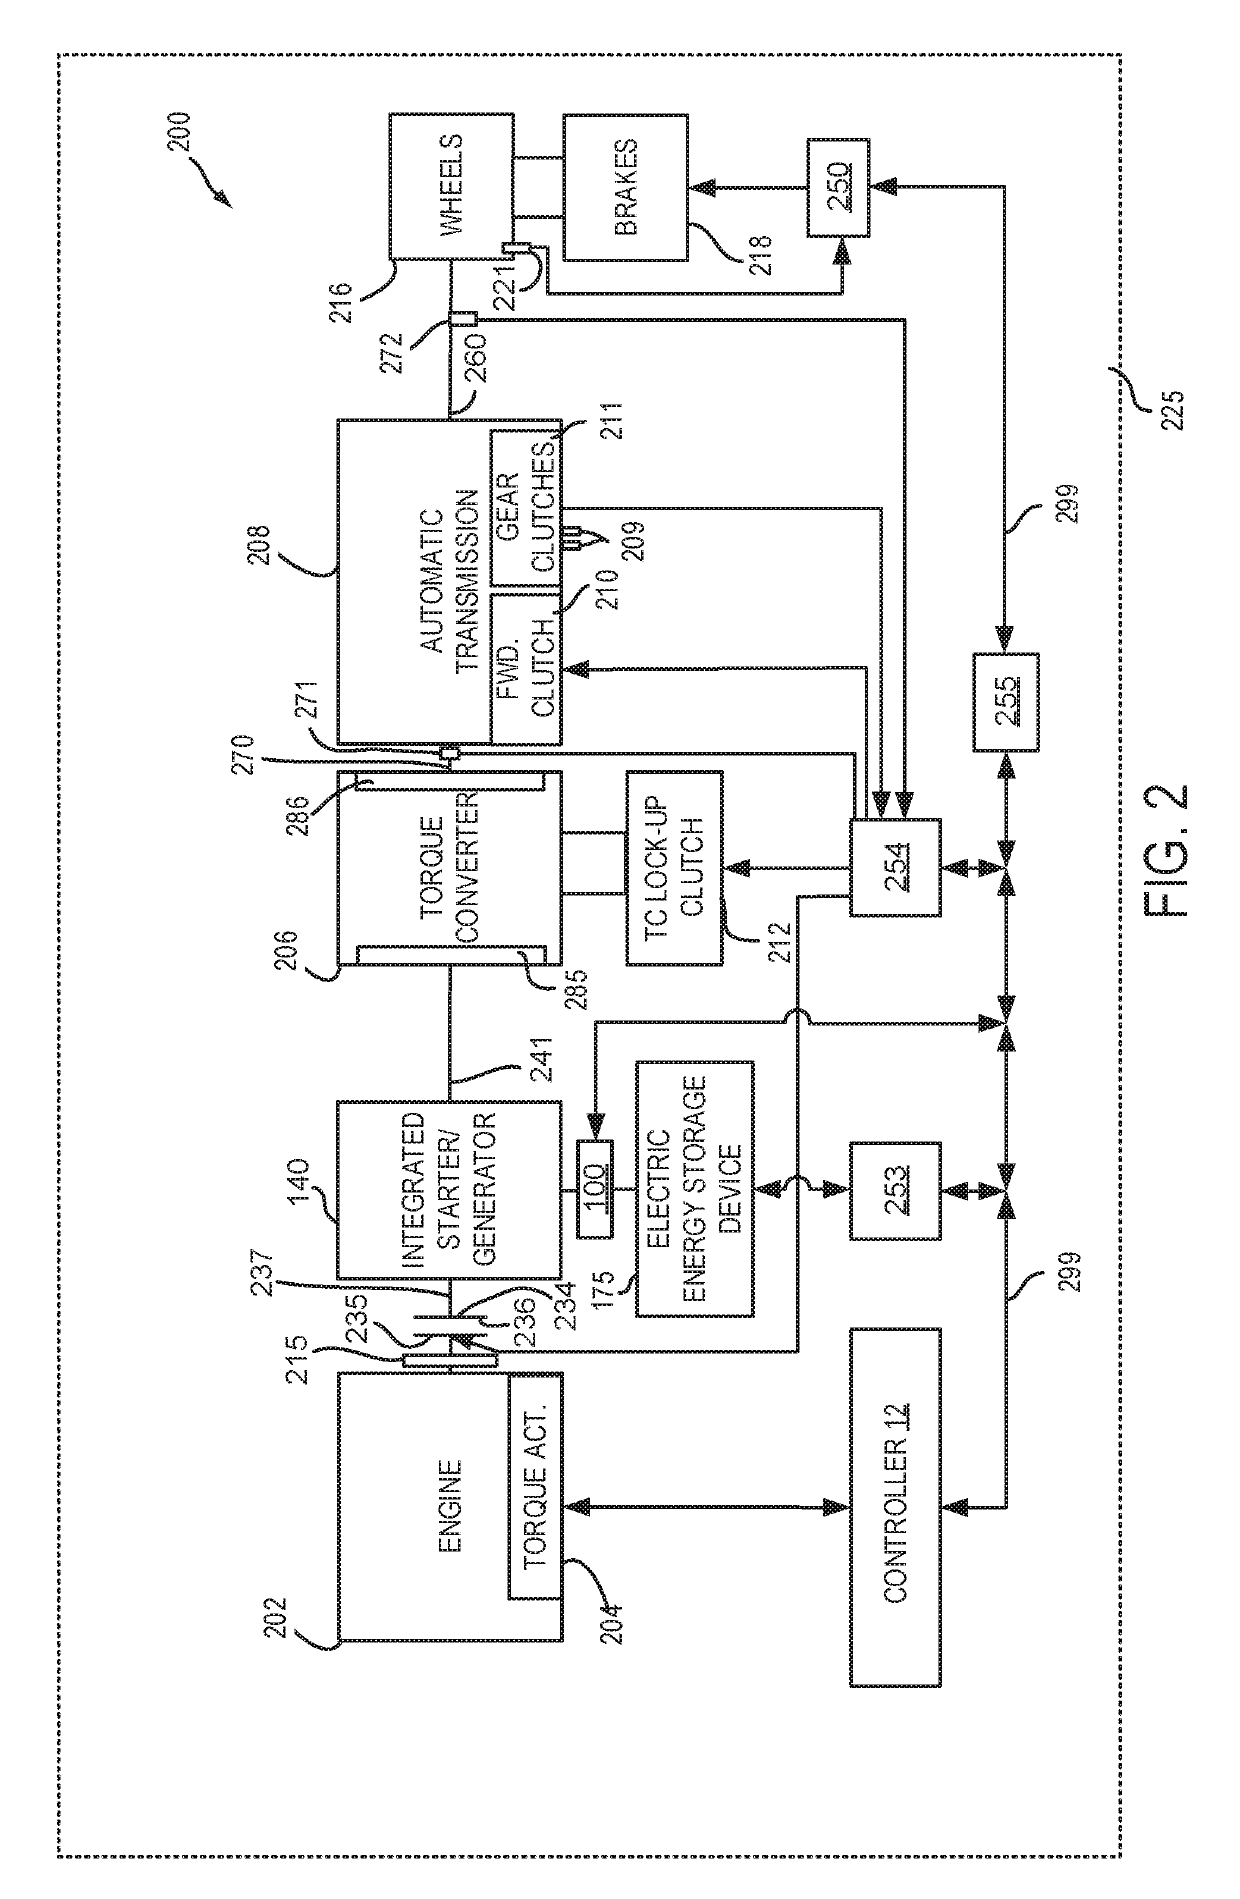 Methods and system for operating a variable voltage controller